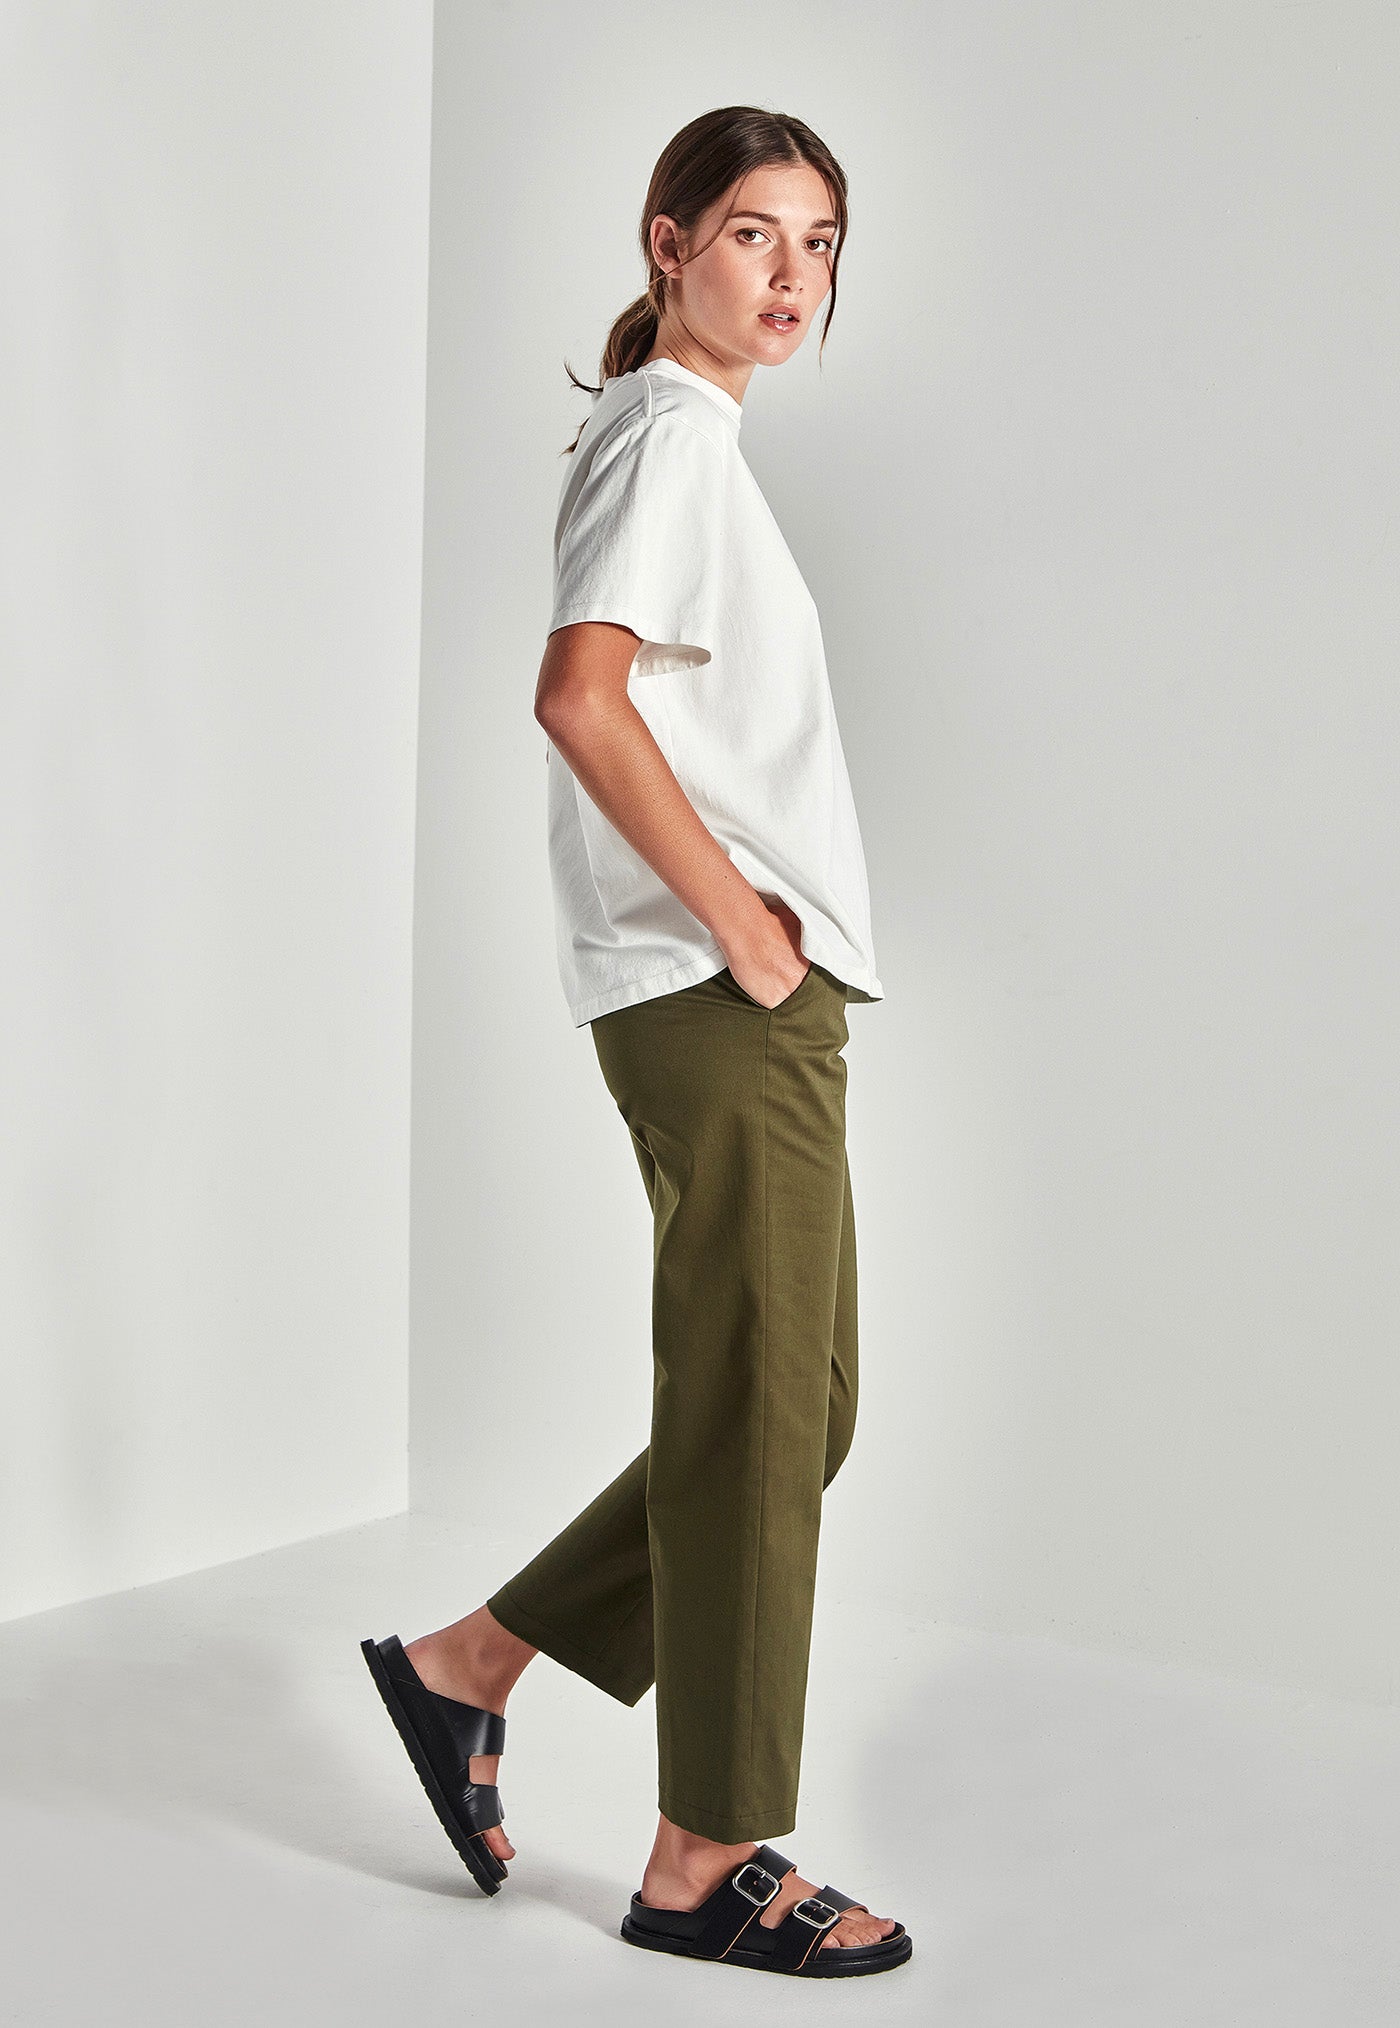 Chino Pant - Olive sold by Angel Divine